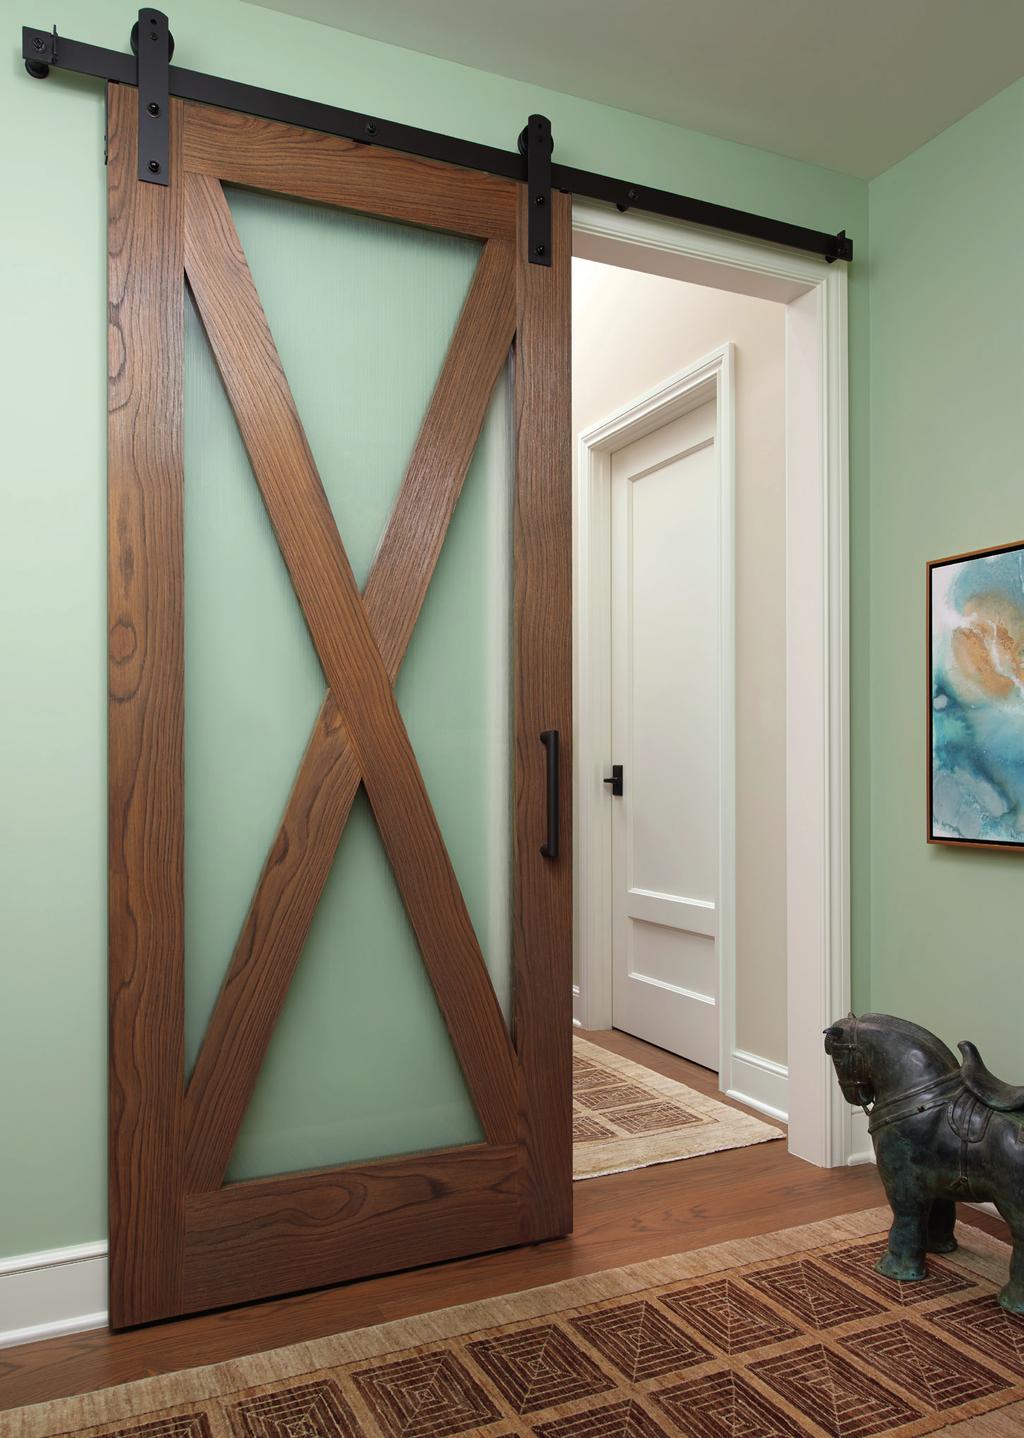 No matter if it s a distinctive wood species or a paint-grade MDF door, the design can be carried across them all keeping the rhythm of the design